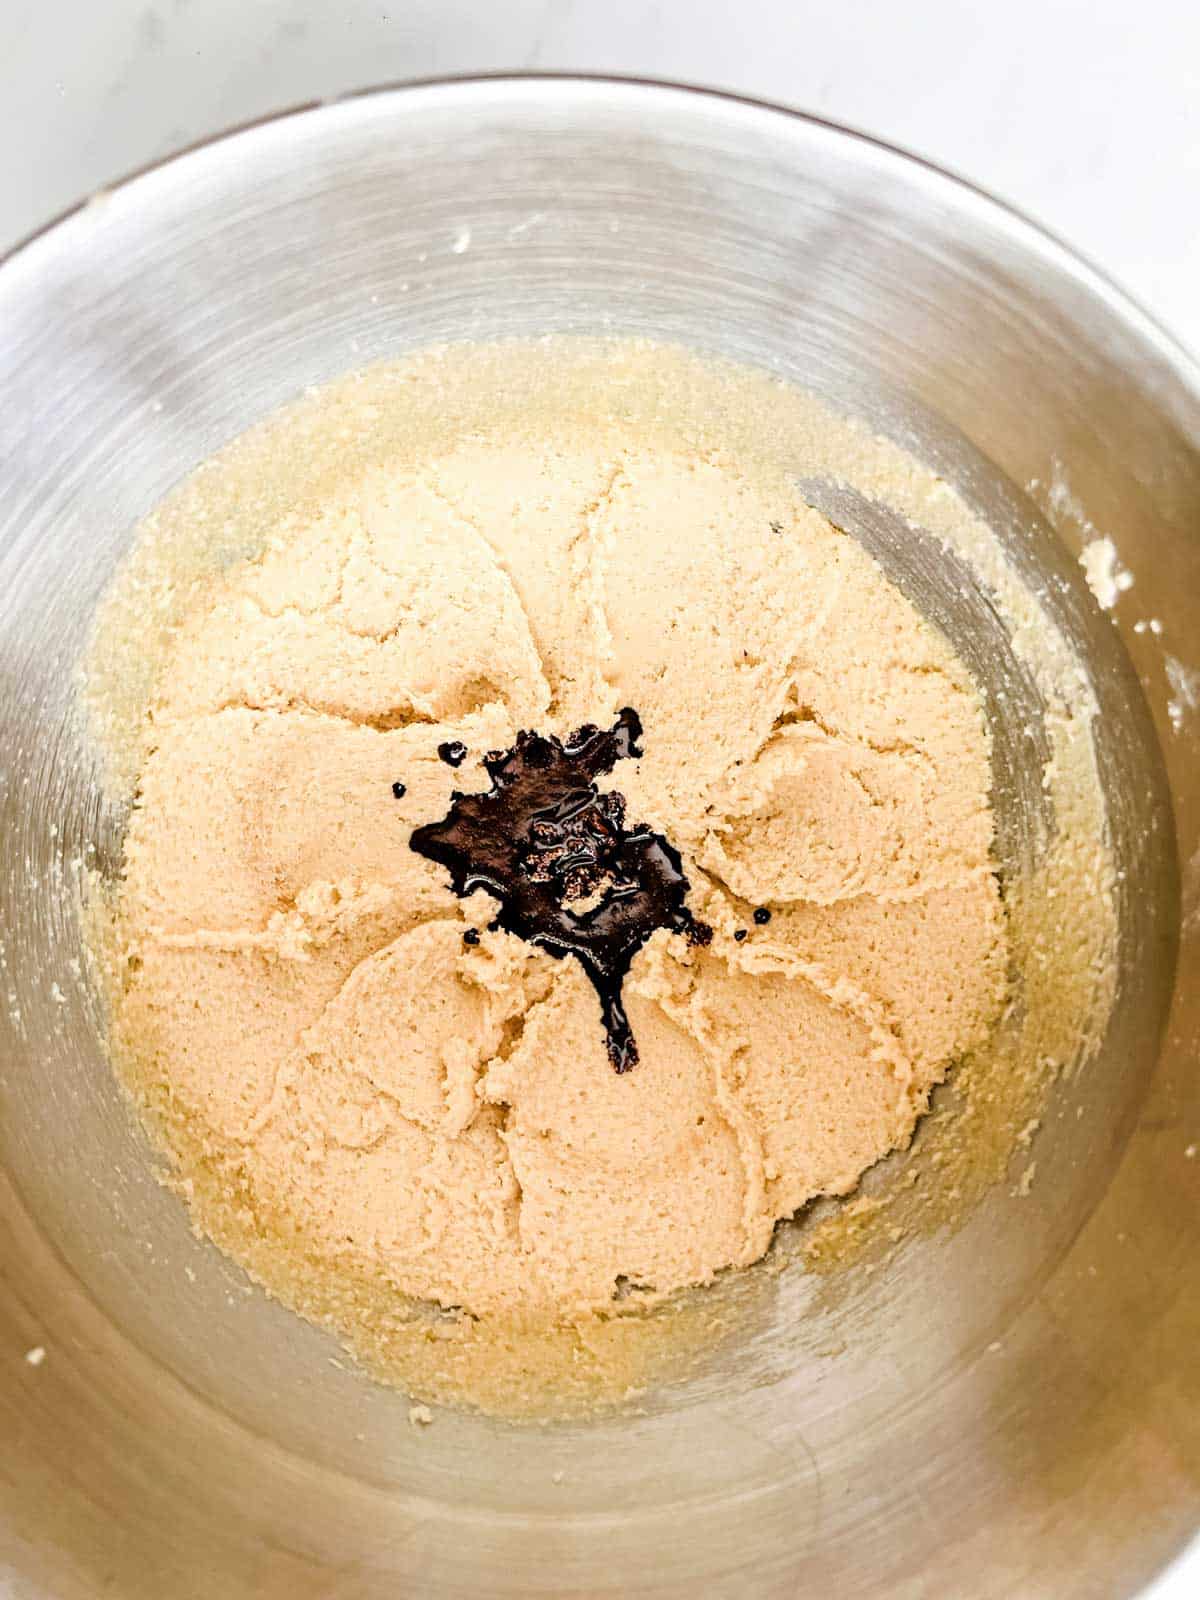 Espresso and water mixture that has just been added to creamed butter and sugar.